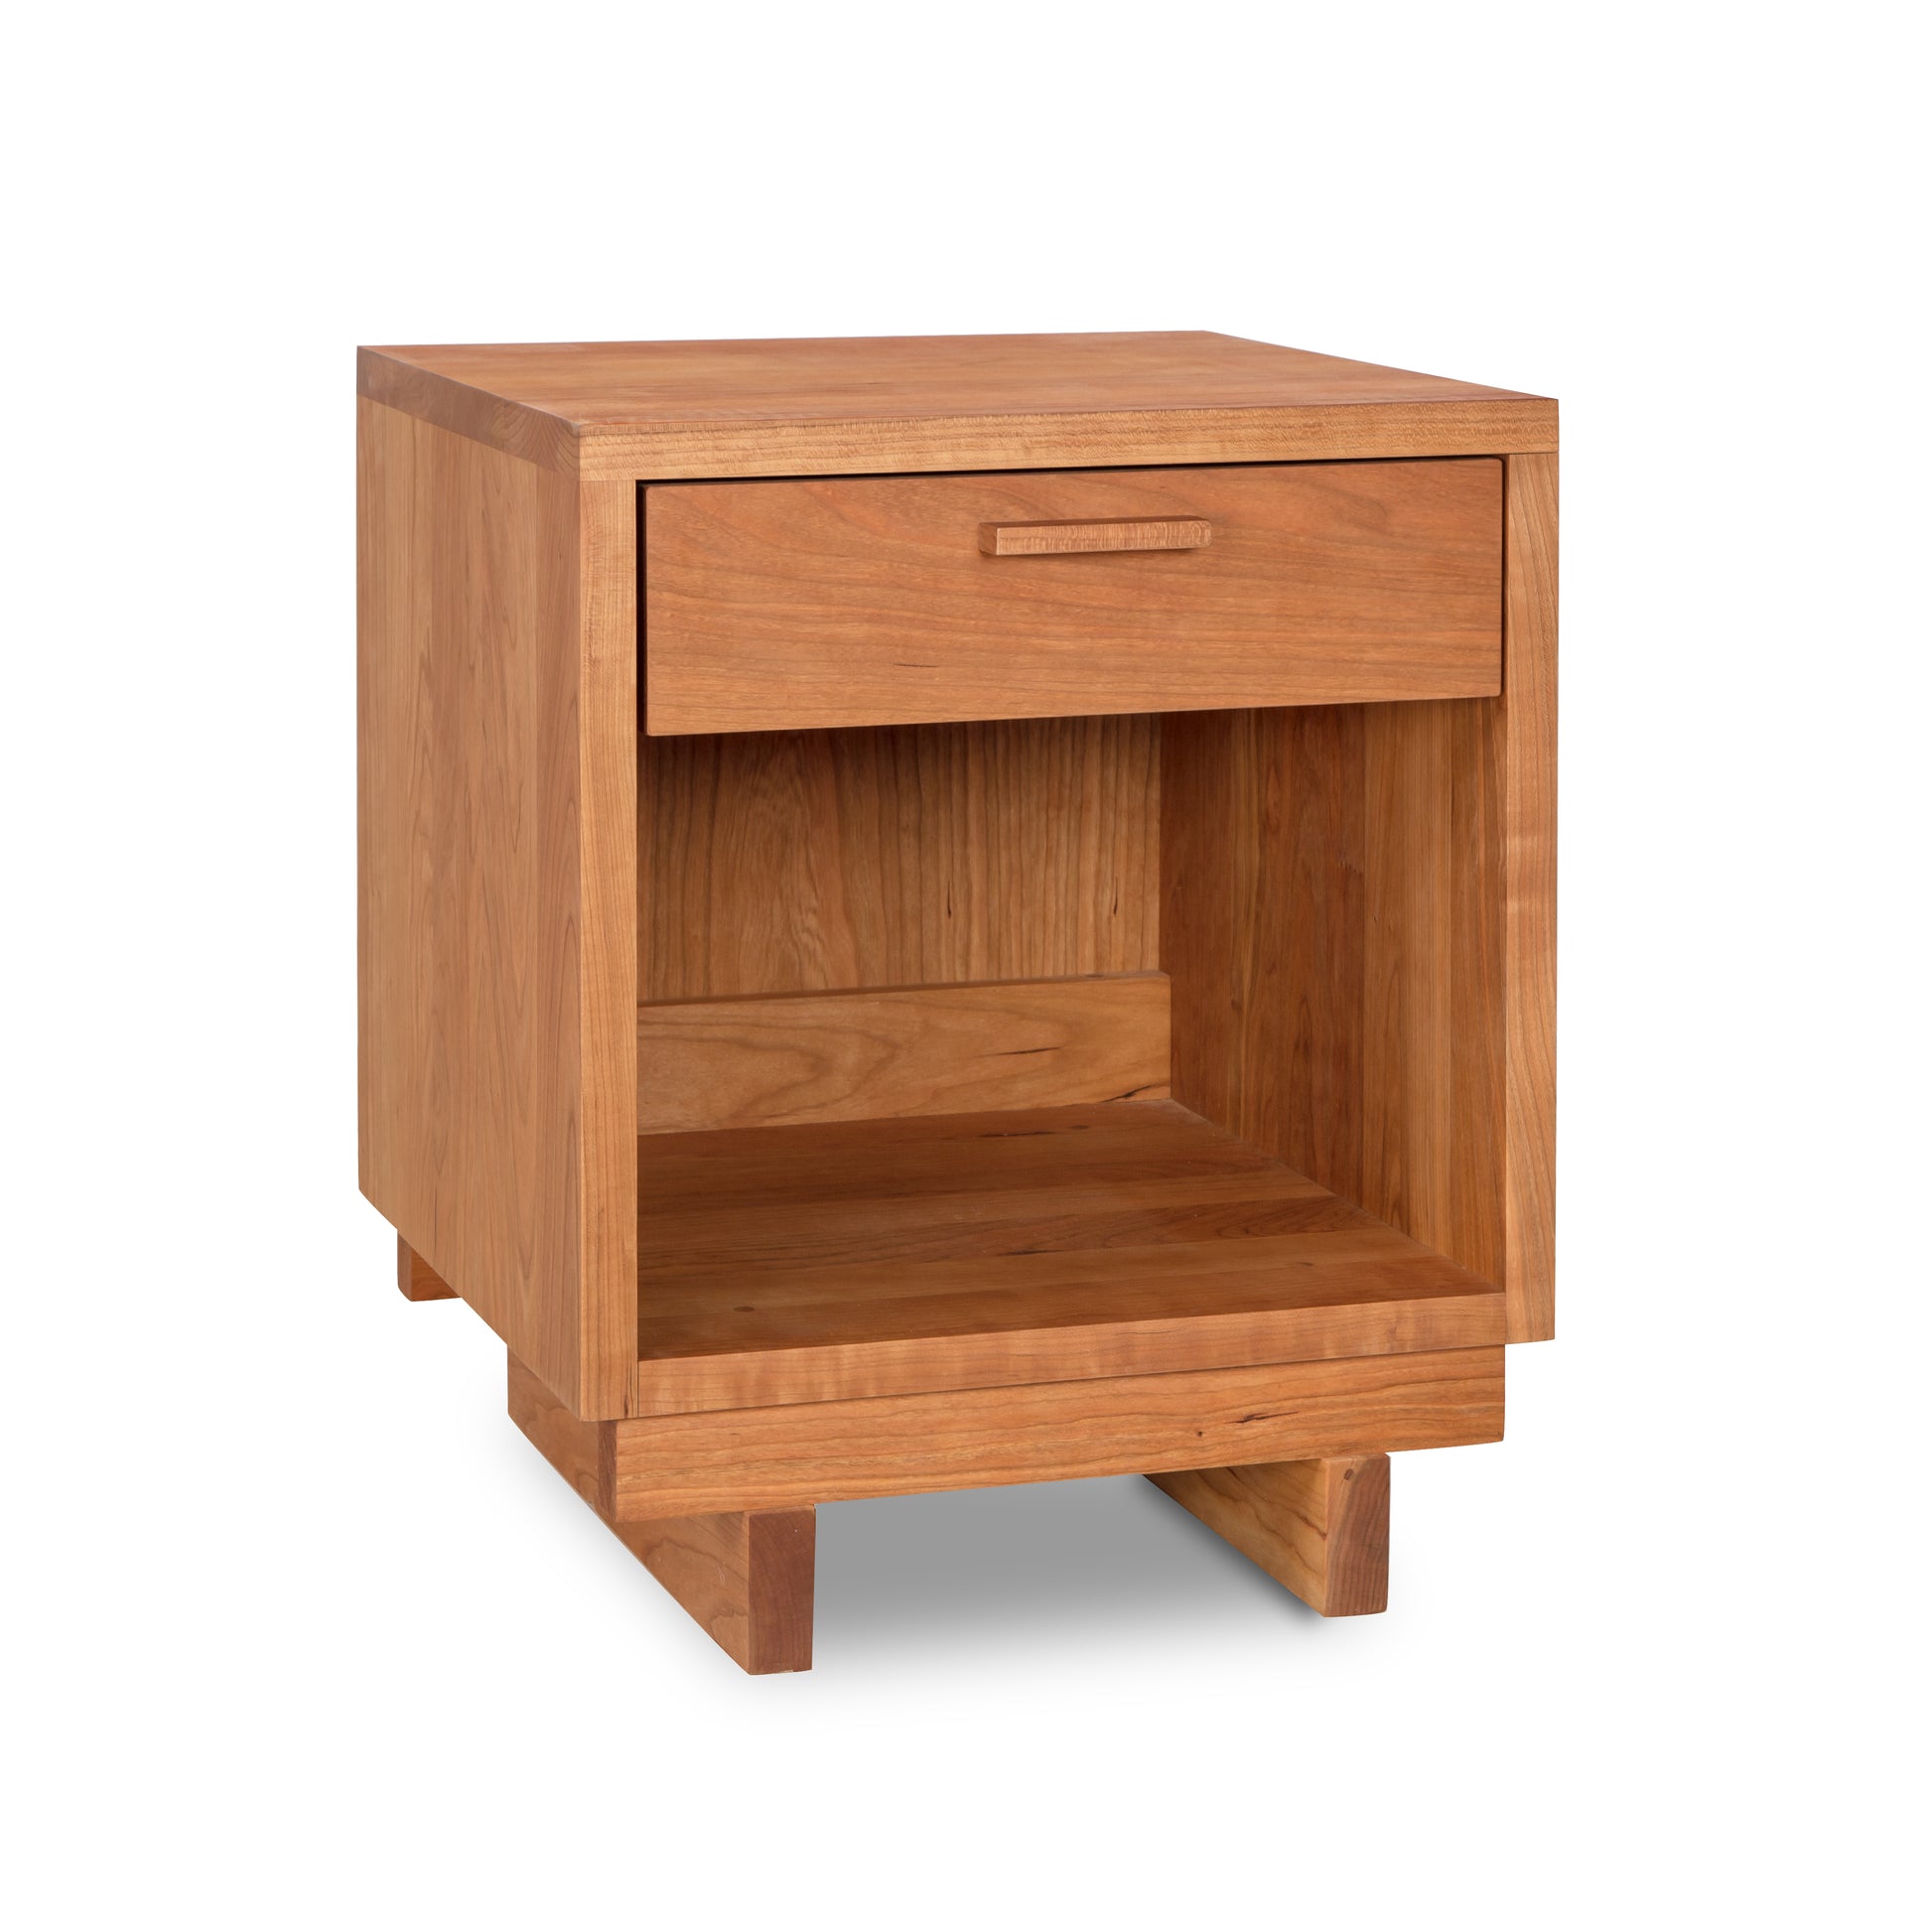 A modern Loft 1-Drawer Enclosed Shelf Nightstand with a drawer on top, perfect as a bedside table, created by Vermont Furniture Designs.